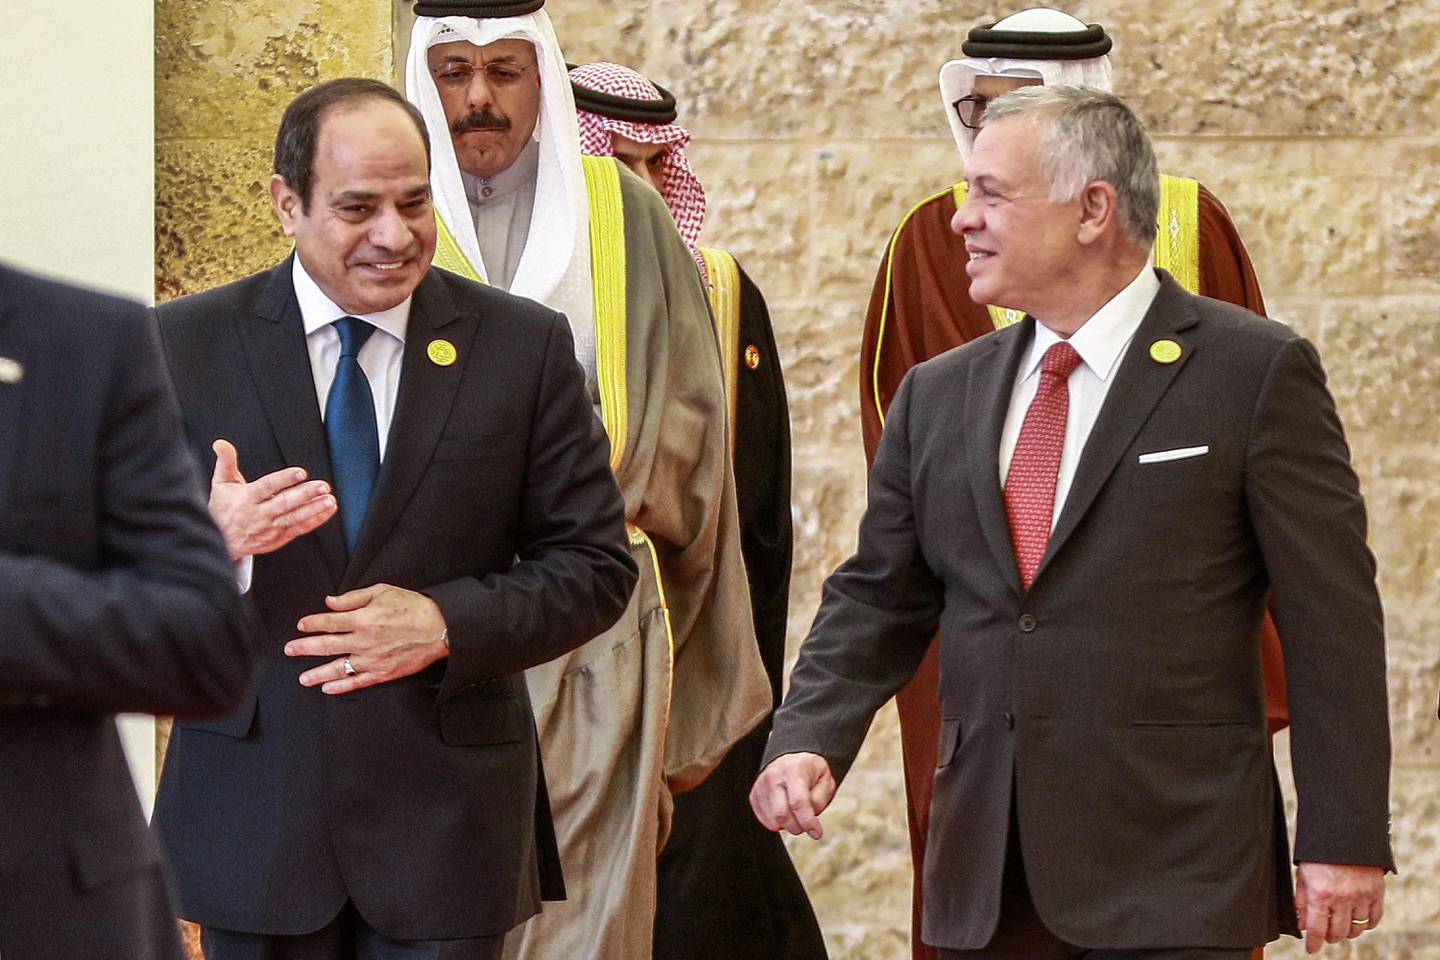 Jordan's King Abdullah II, right, with Egypt's President Abdel Fattah El Sisi at the conference. AFP